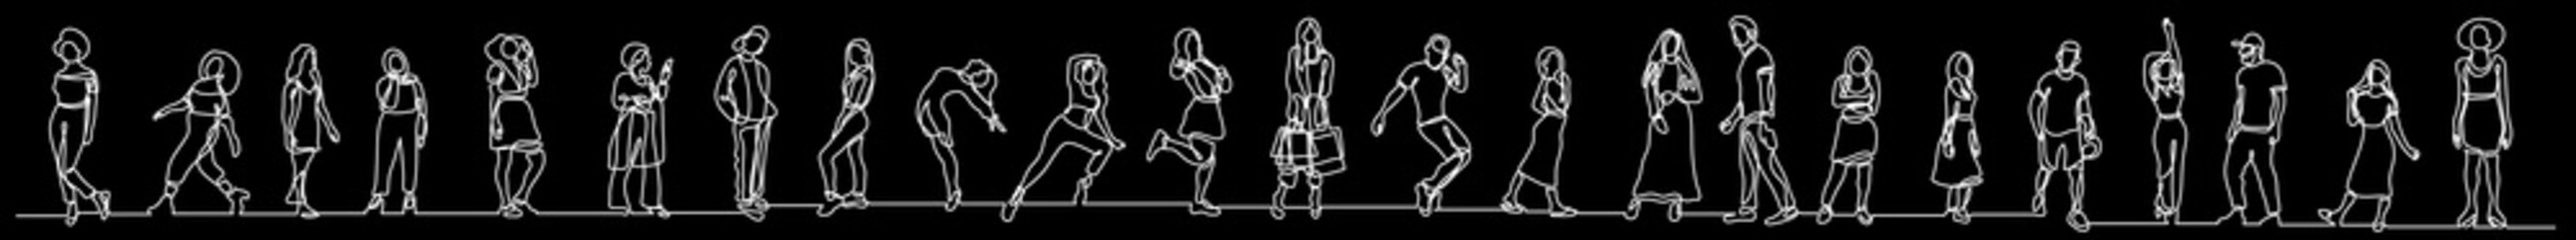 continuous line drawing vector illustration with FULLY EDITABLE STROKE of group of various positive diverse line people in a row on black background